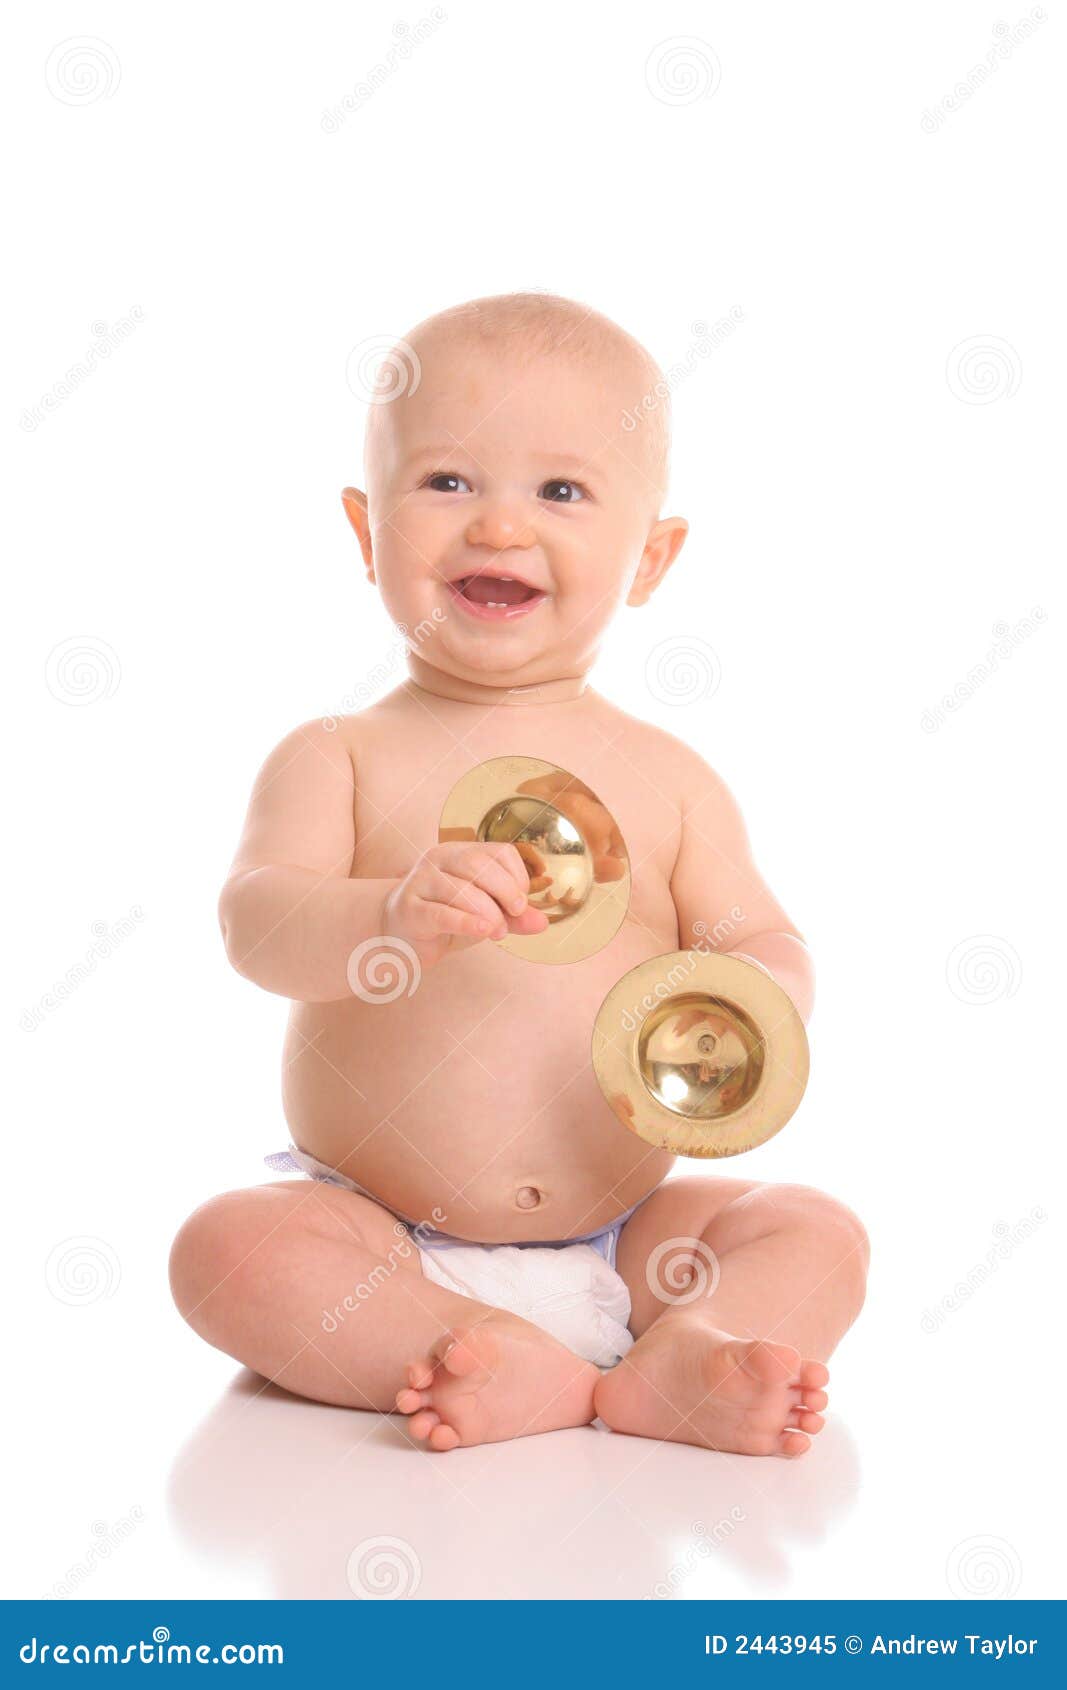 baby cymbal player portrait